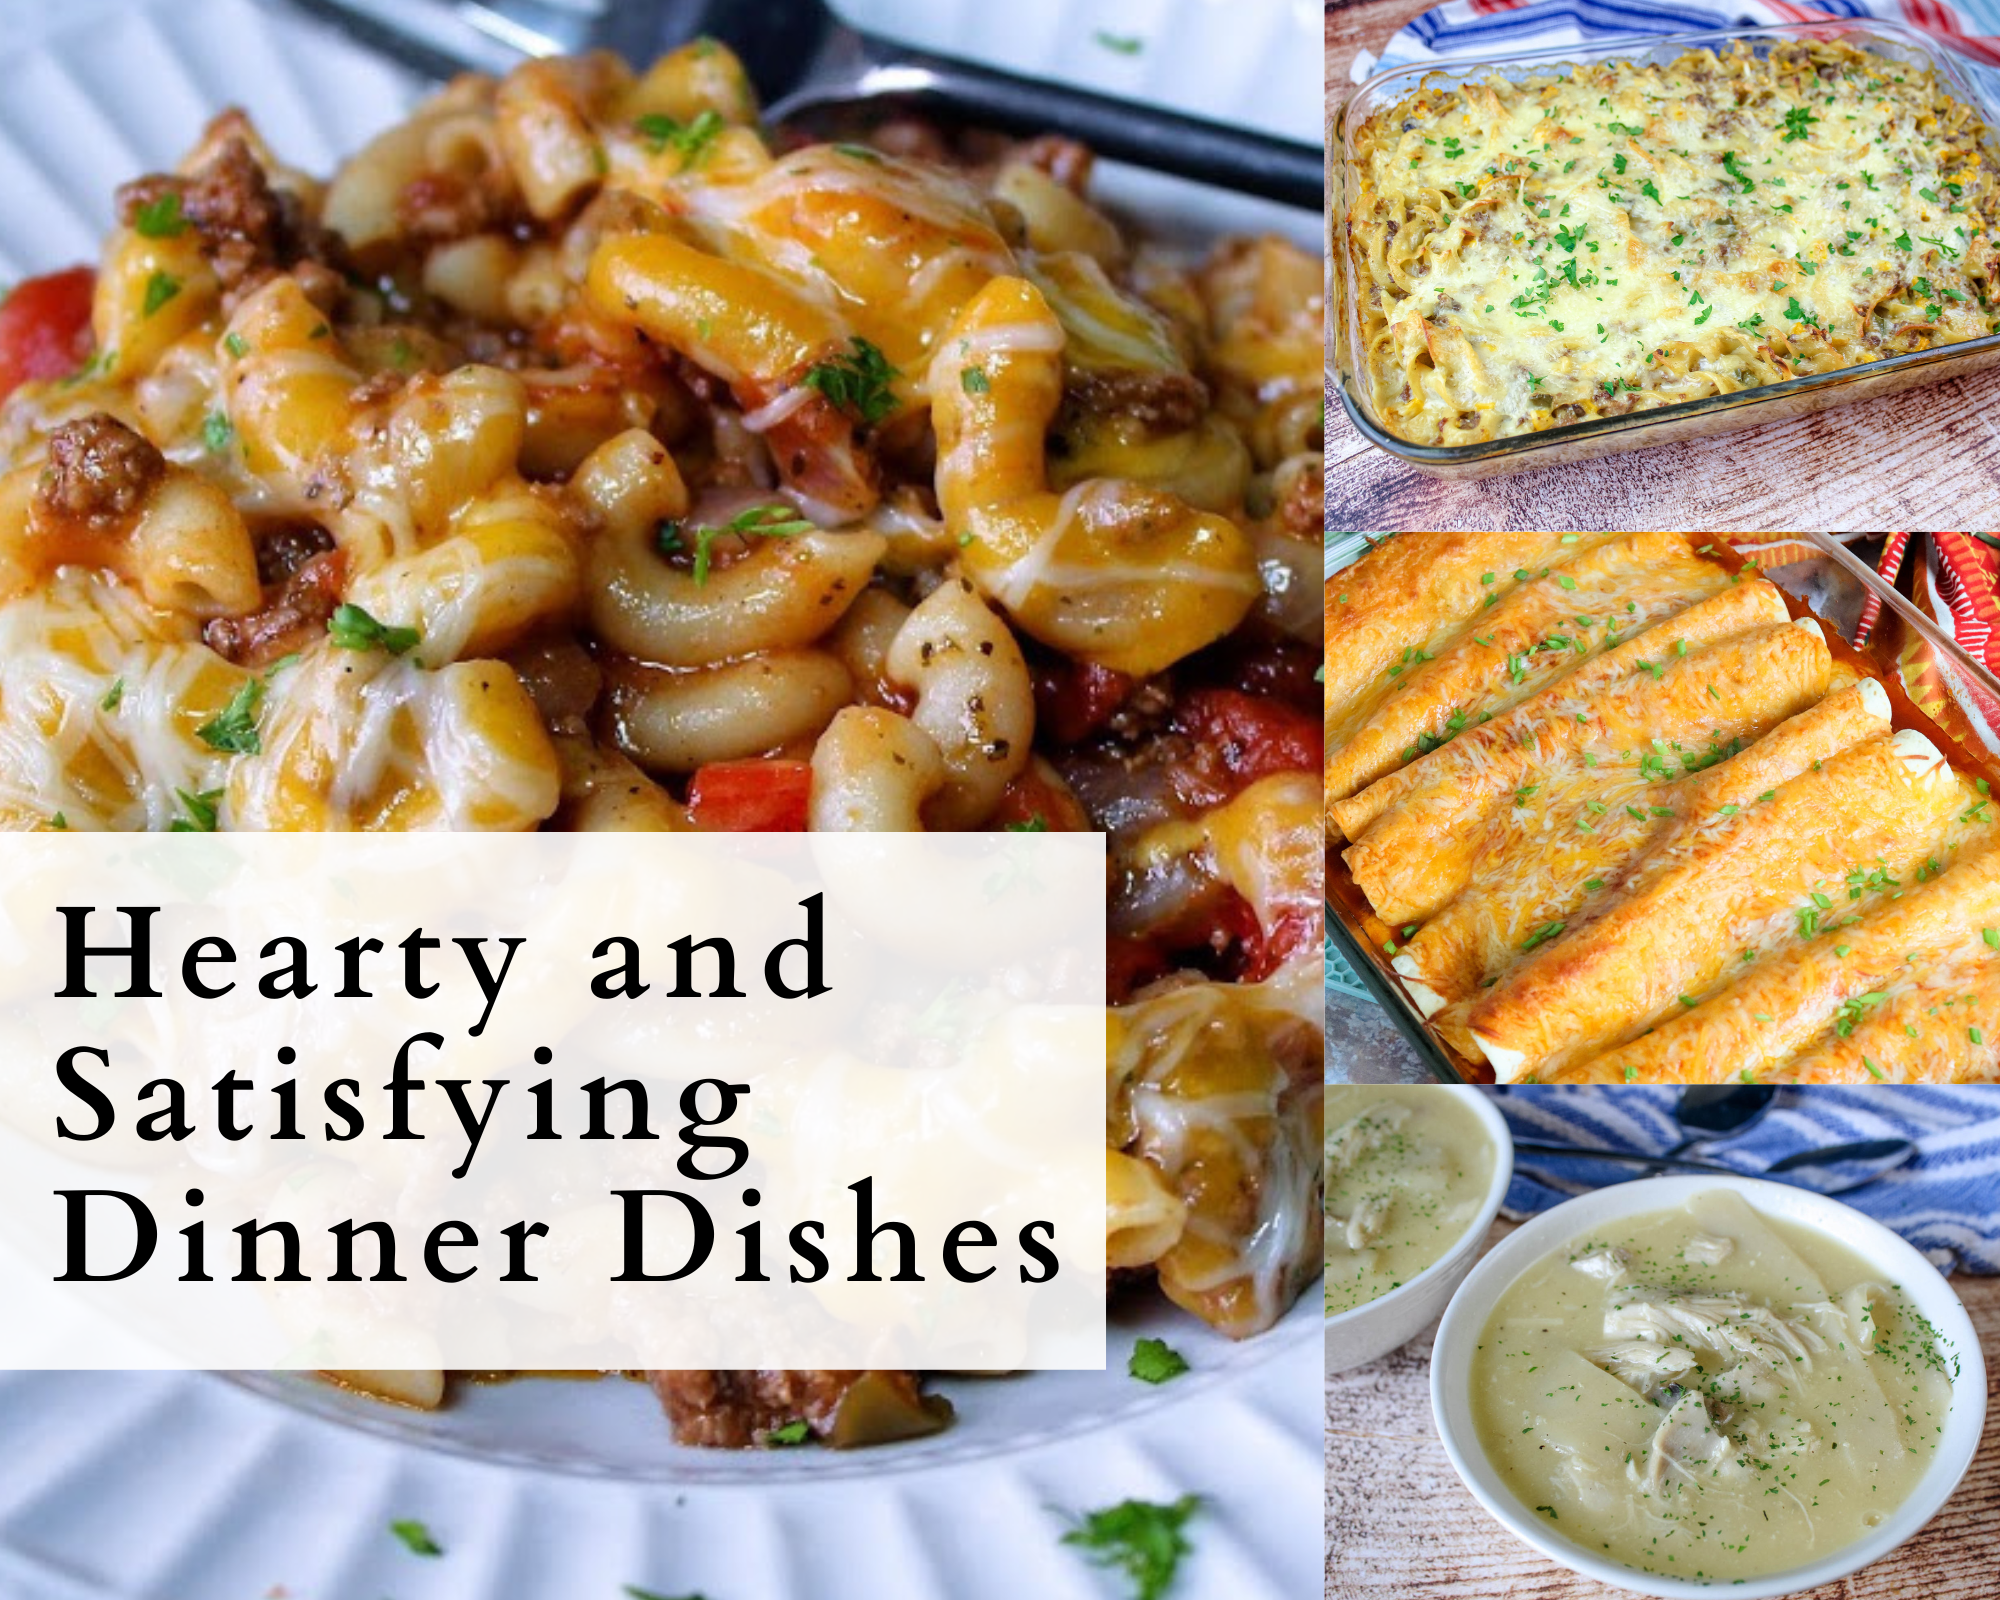 Hearty and Satisfying Dinner Dishes